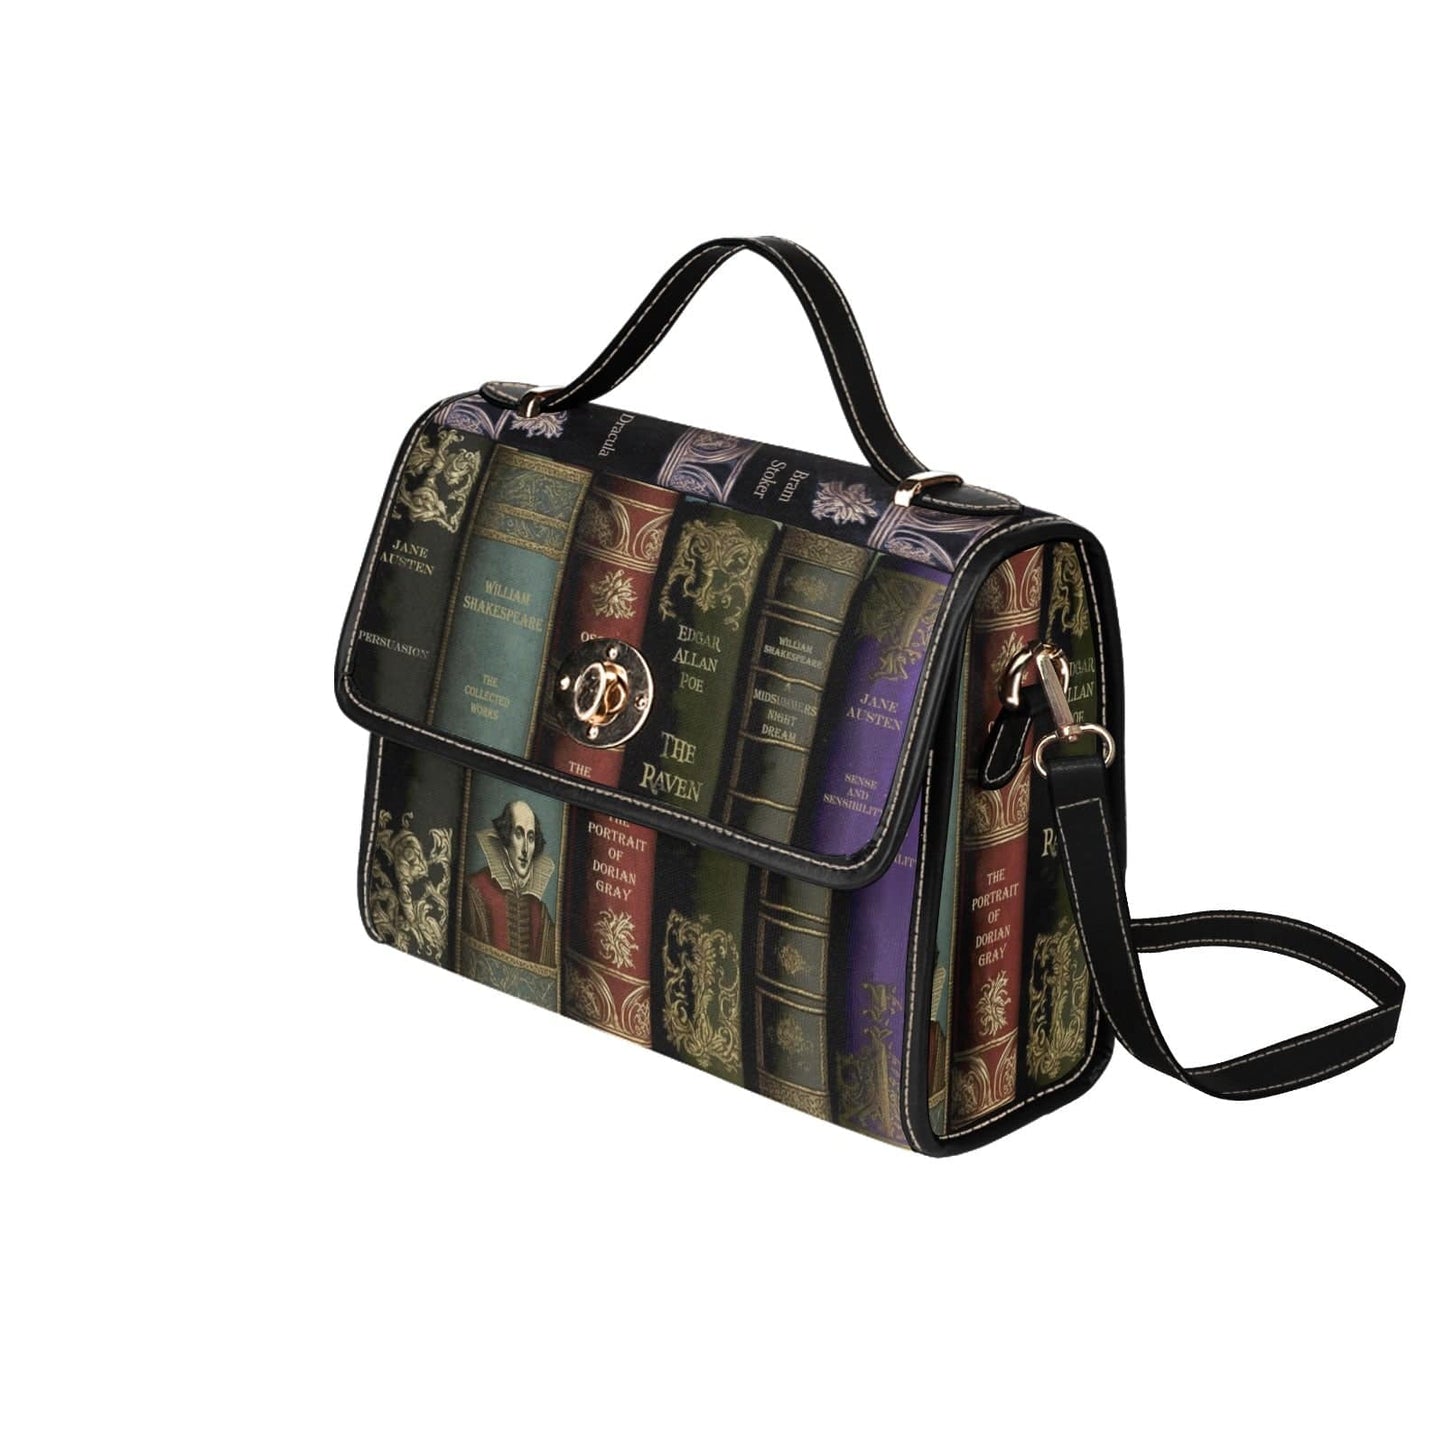 front side view of the satchel handbag printed with spines of classic literature titles in dark colours 